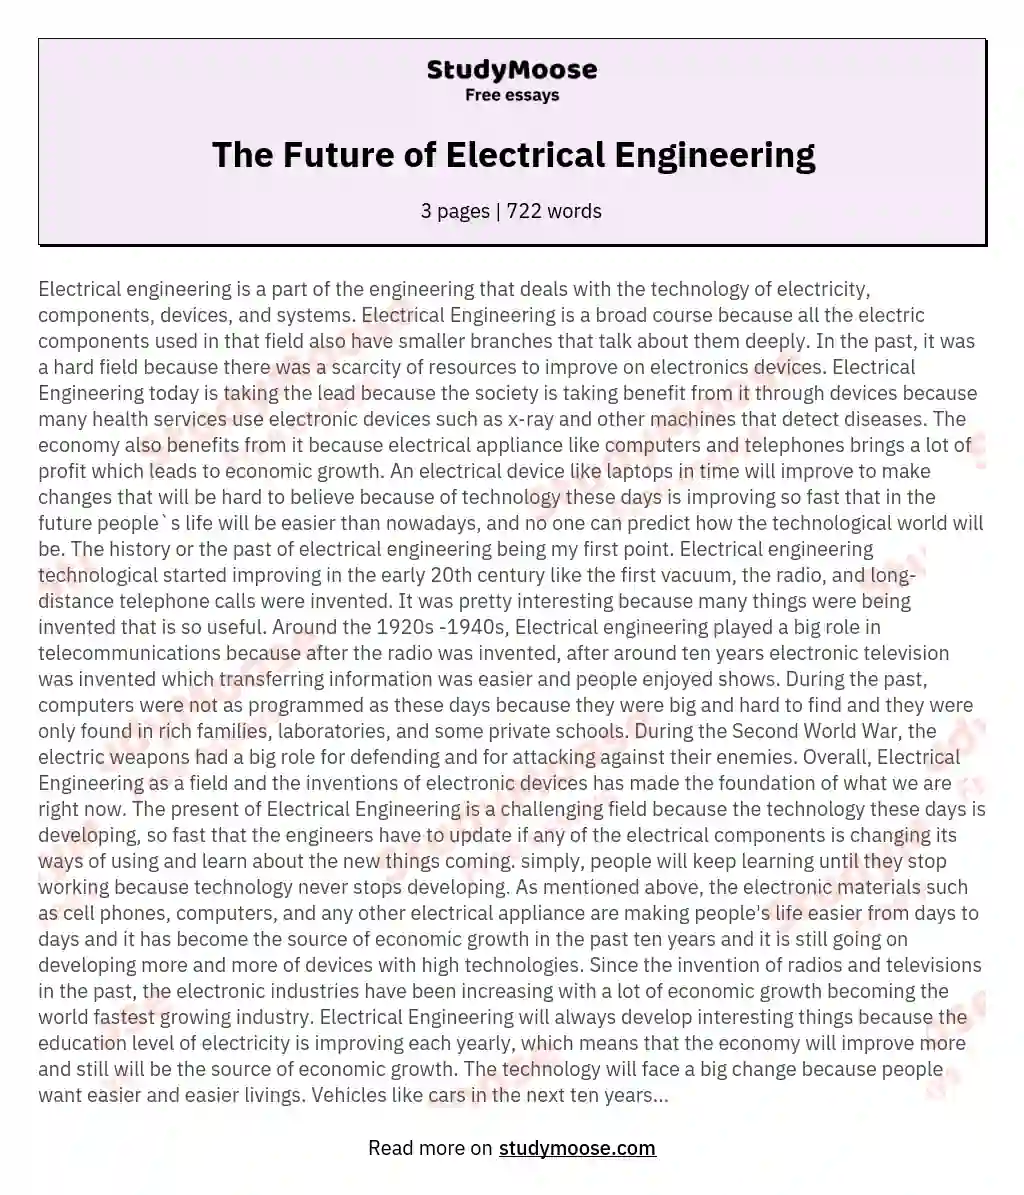 The Future of Electrical Engineering essay